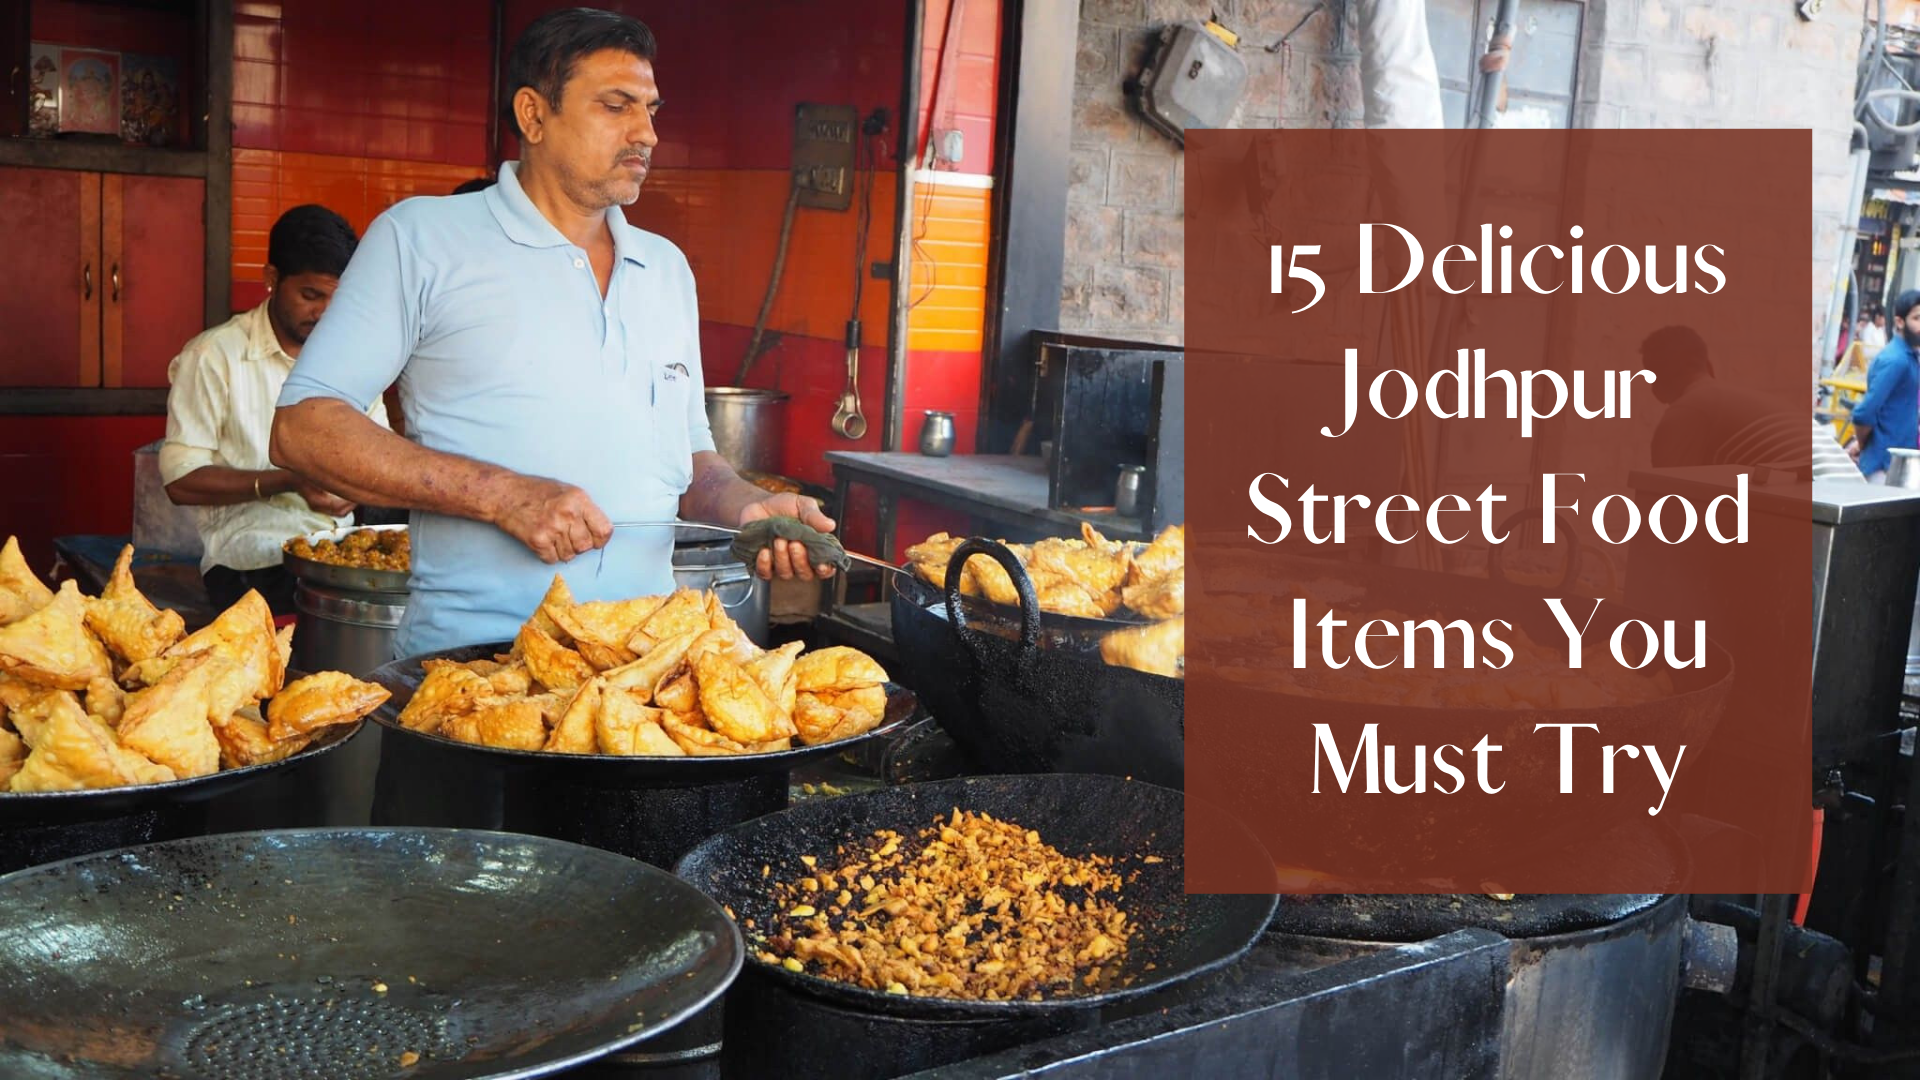 15 Delicious Jodhpur Street Food Items You Must Try